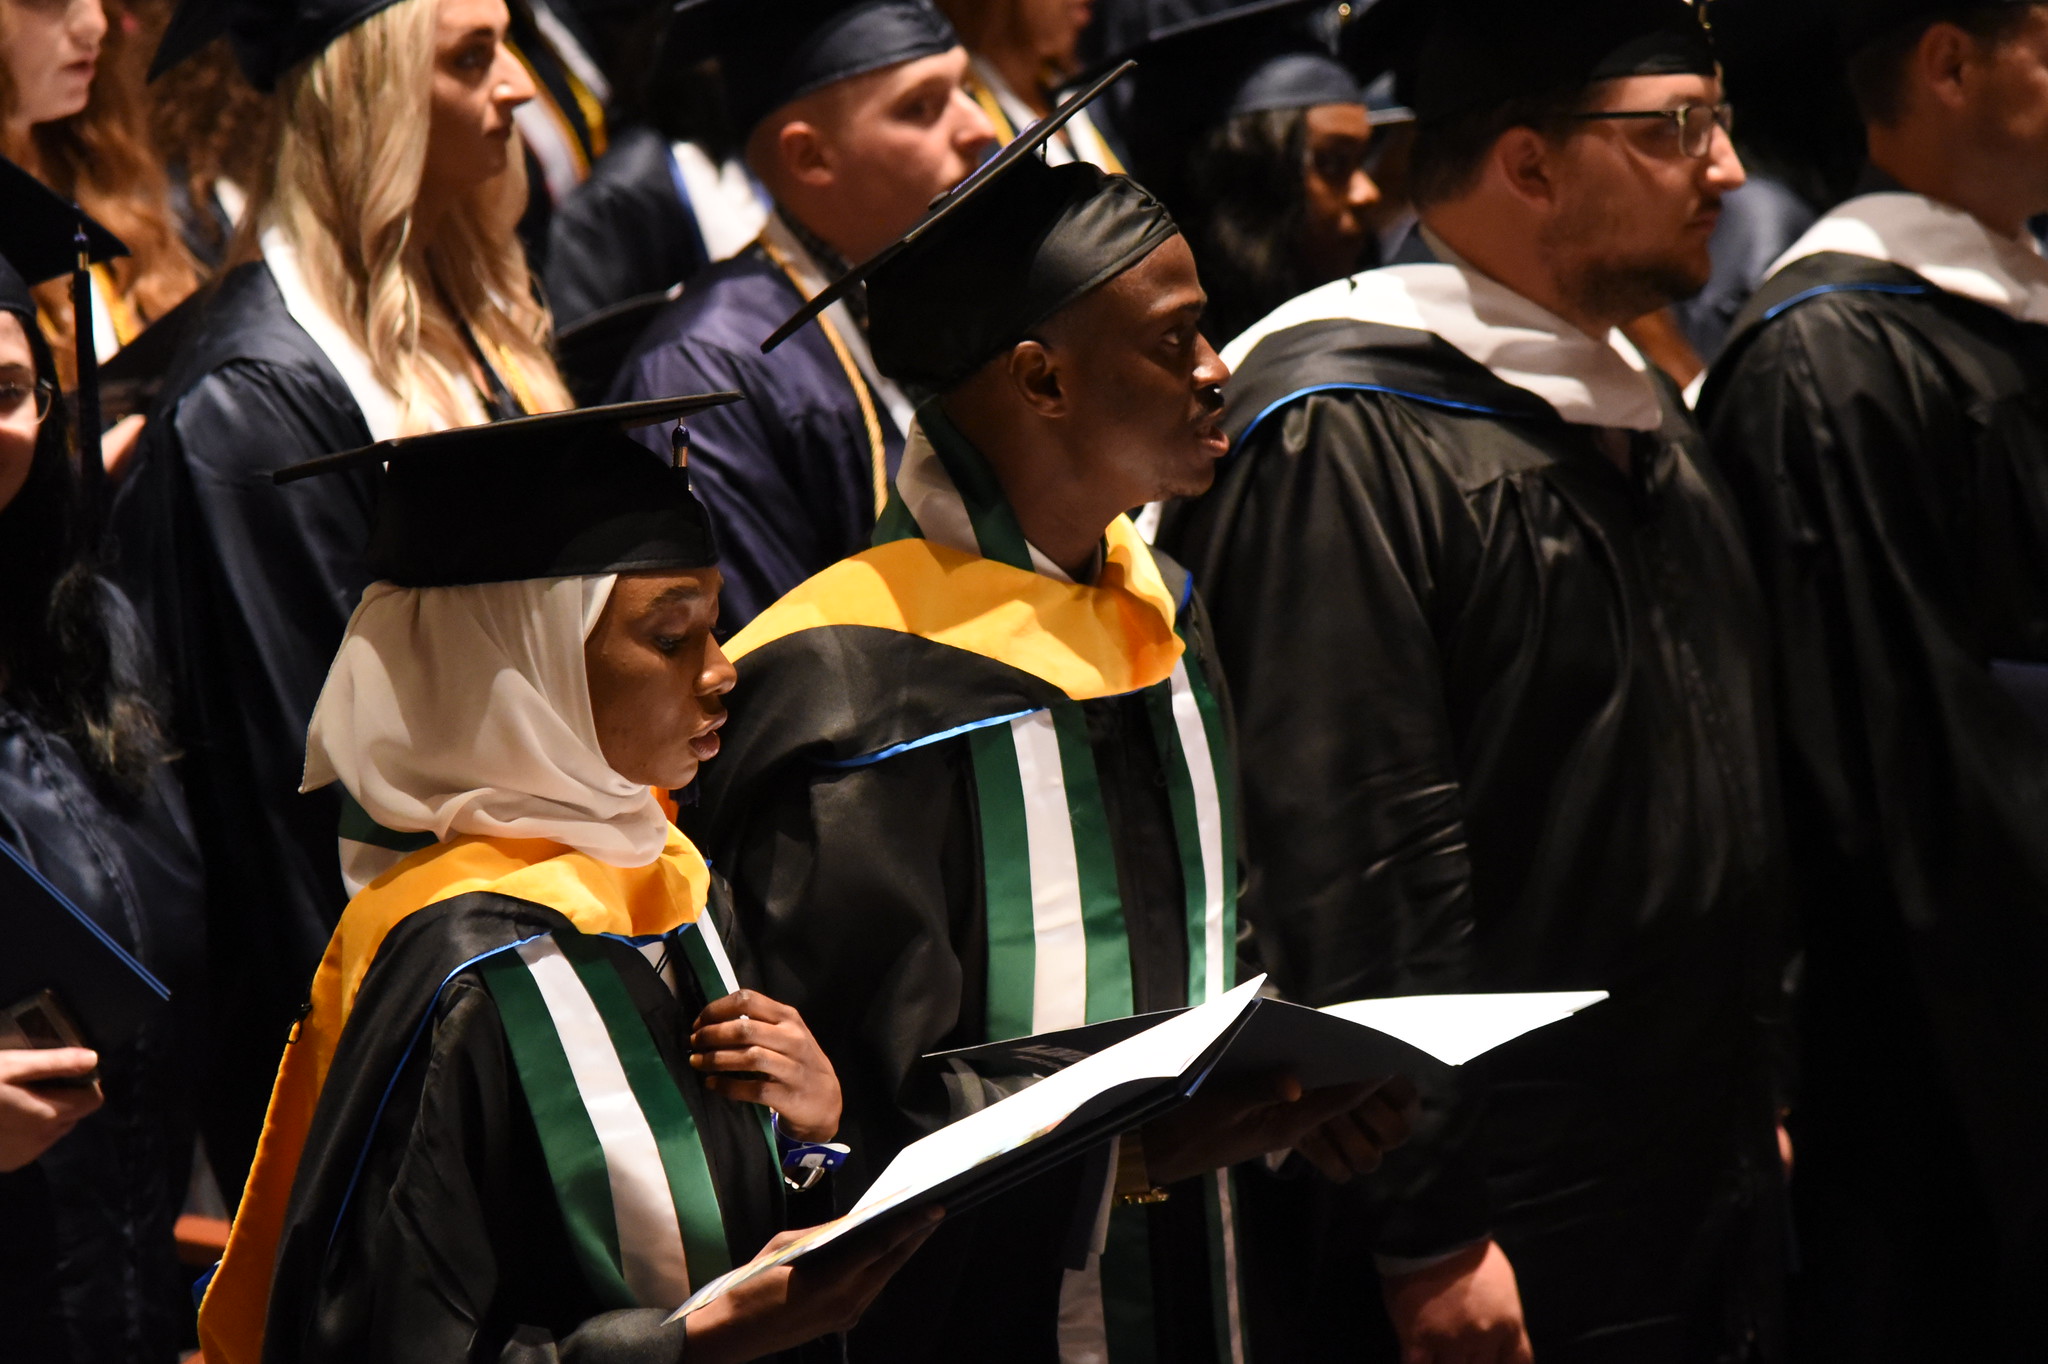 Lincoln University of Missouri celebrated the graduation of the Class of 2023 on Saturday, May 13, 2023.